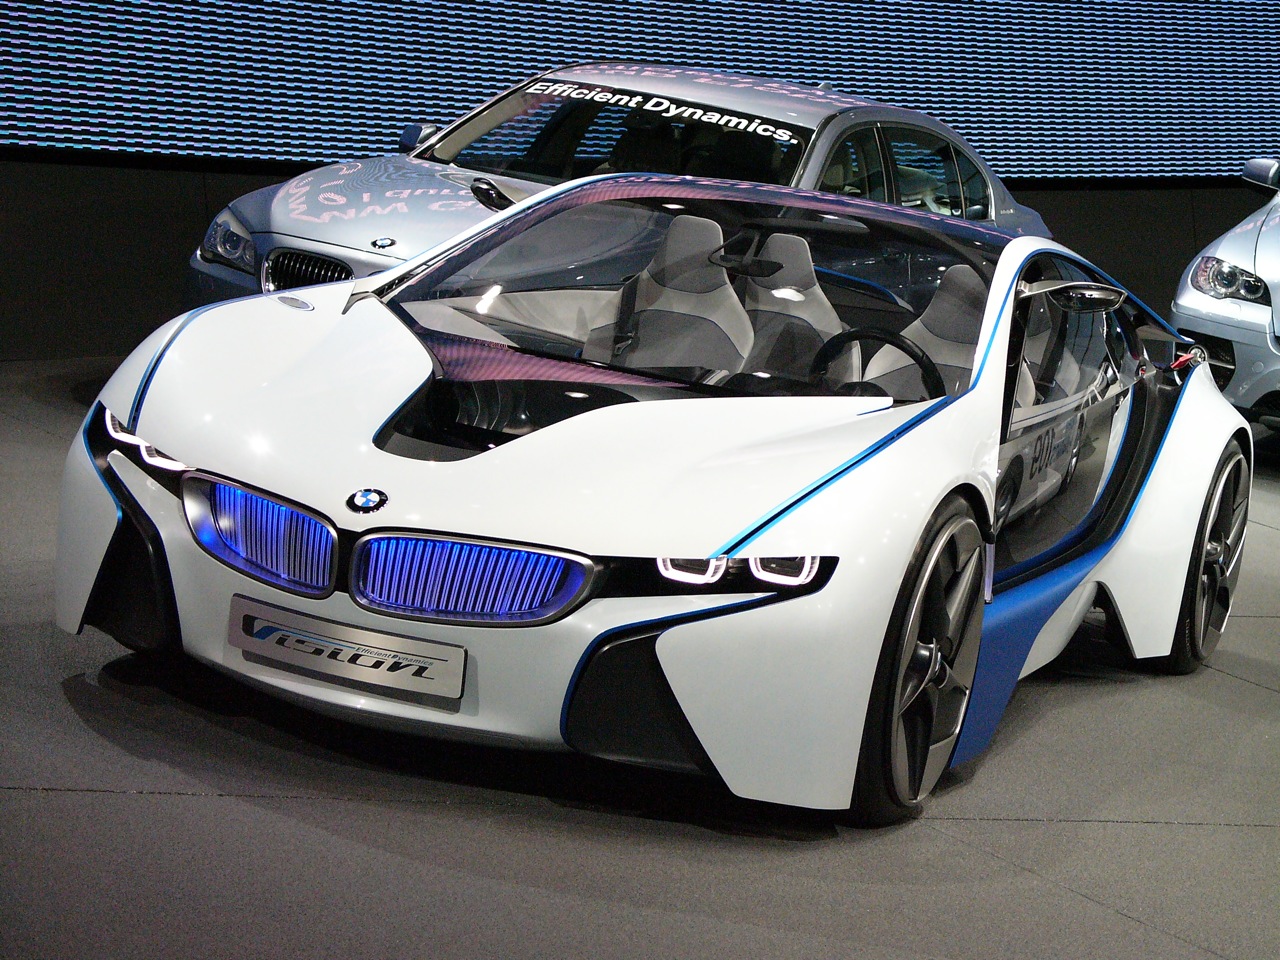 World Car Wallpapers: Cool Bmw cars wallpapers